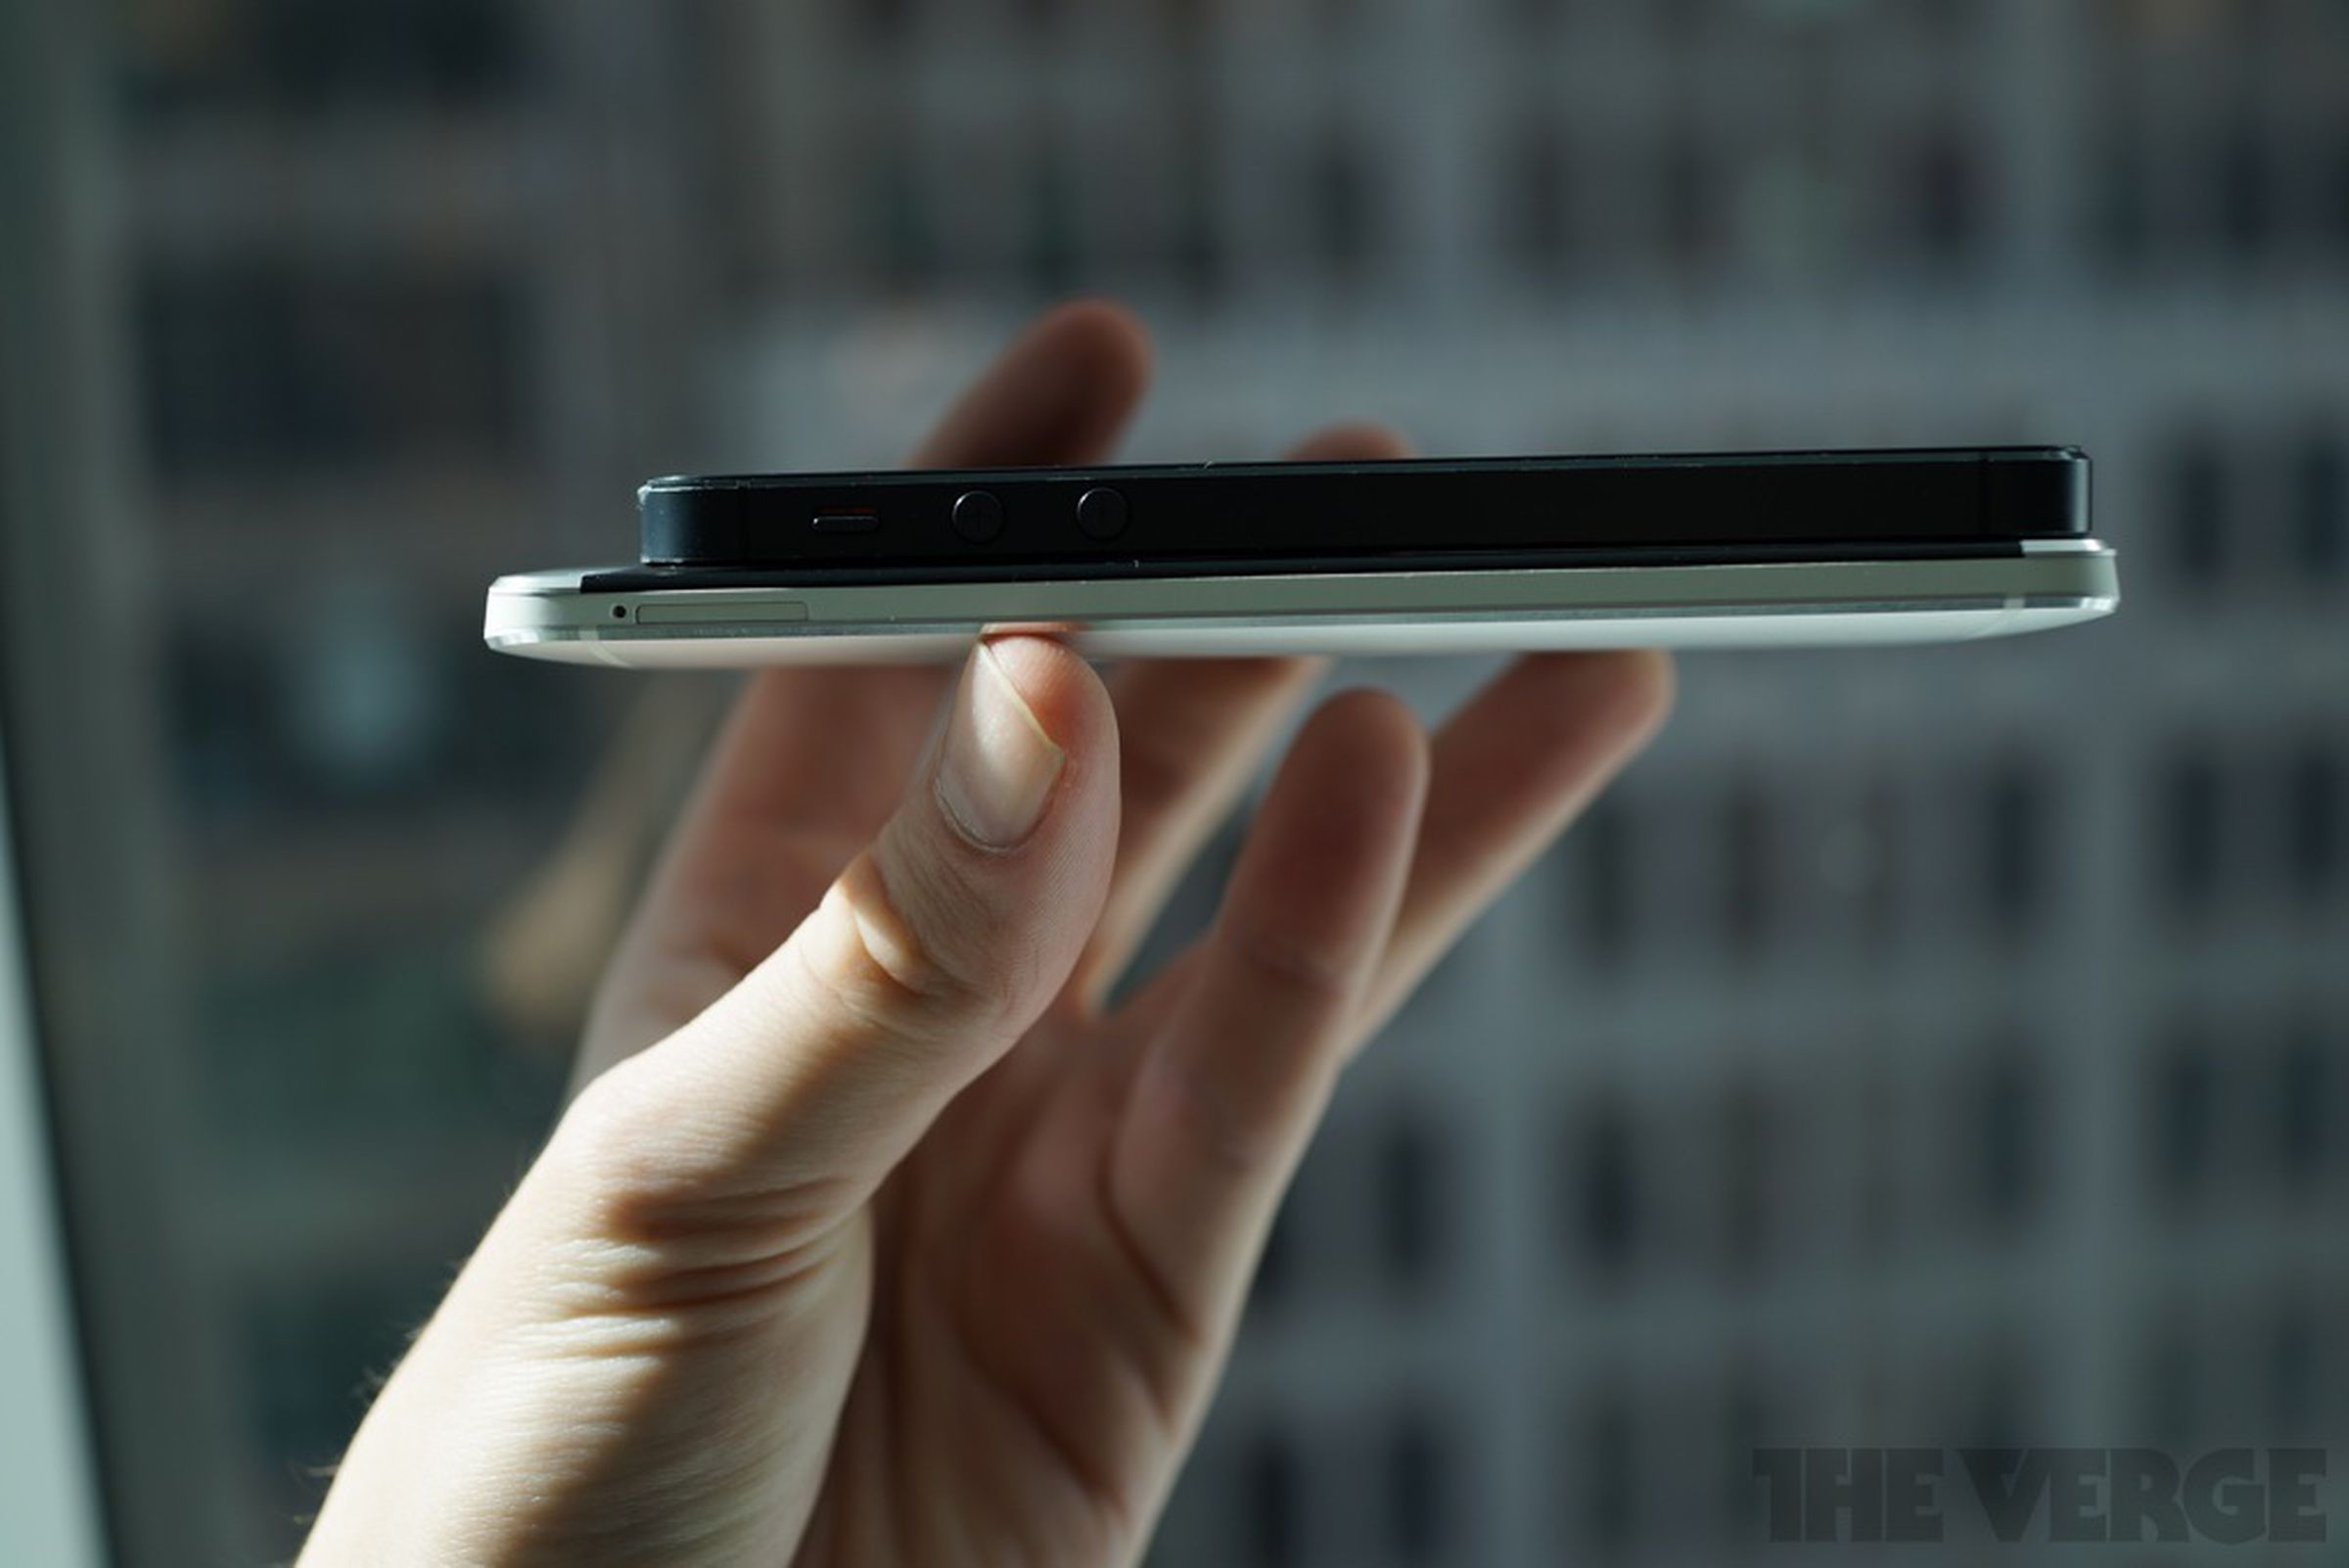 HTC One hands-on pictures